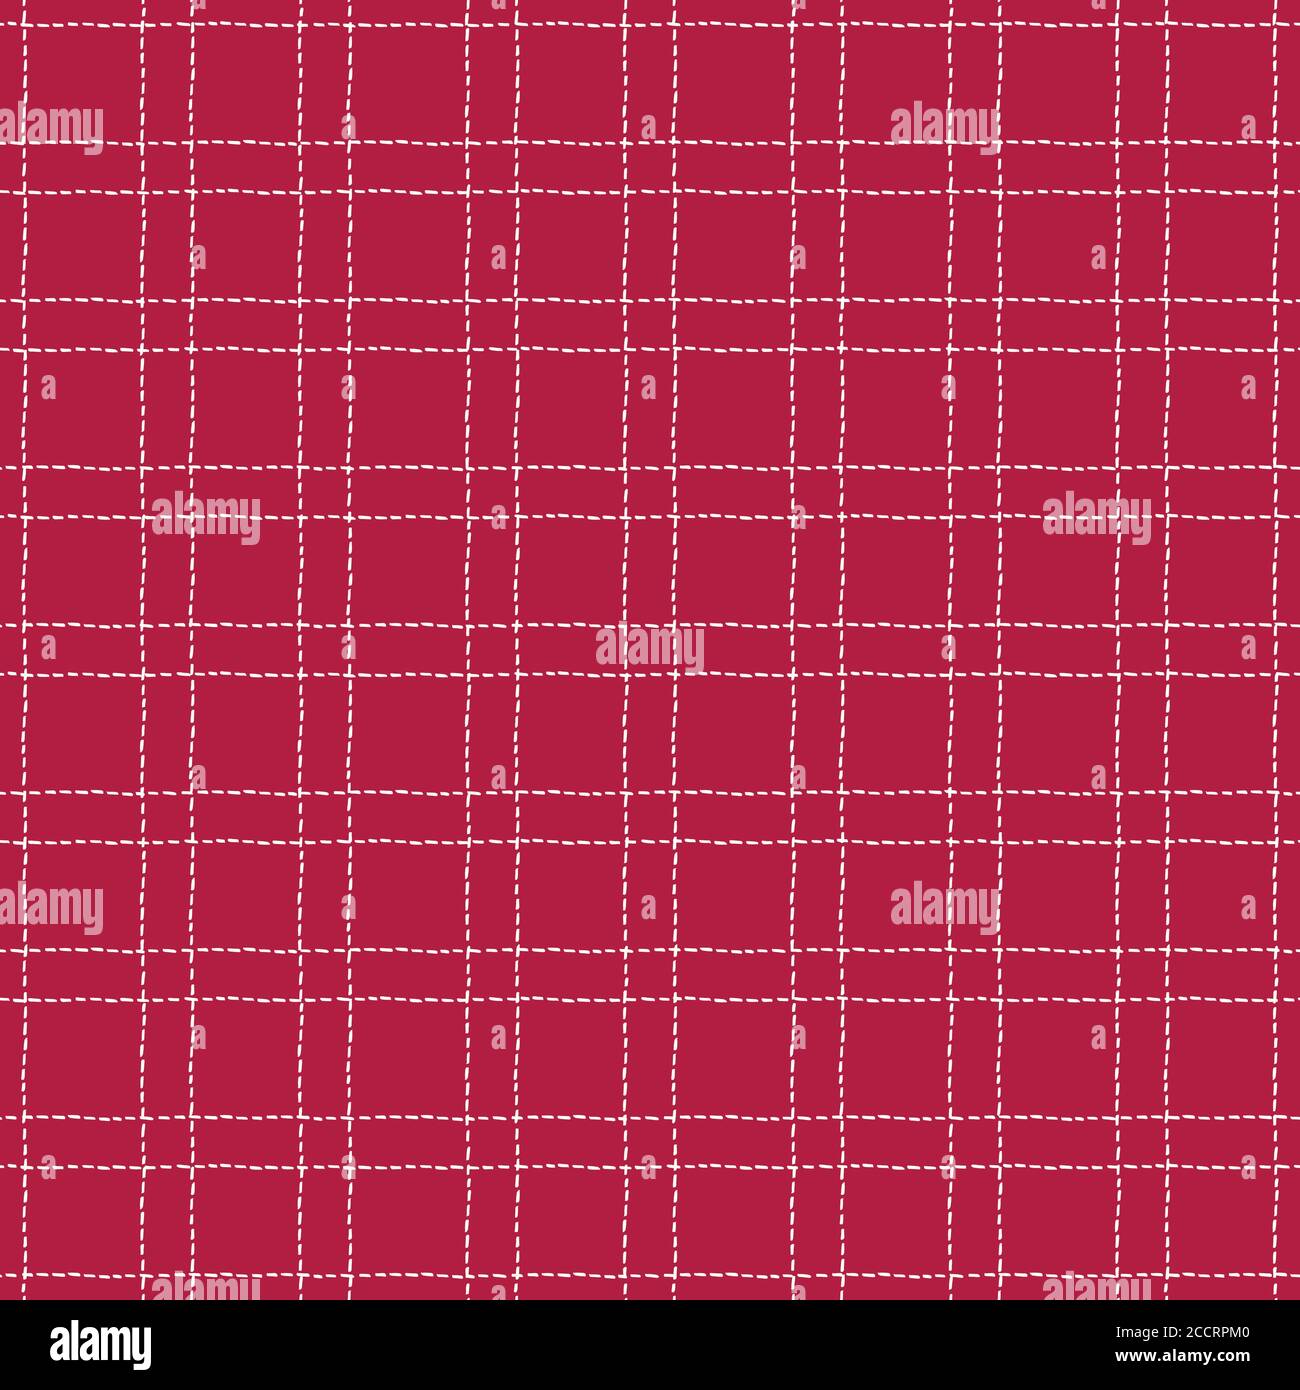 Classic Hand-Drawn White and Red Stitched Plaid Checks Vector Seamless Pattern Stock Vector